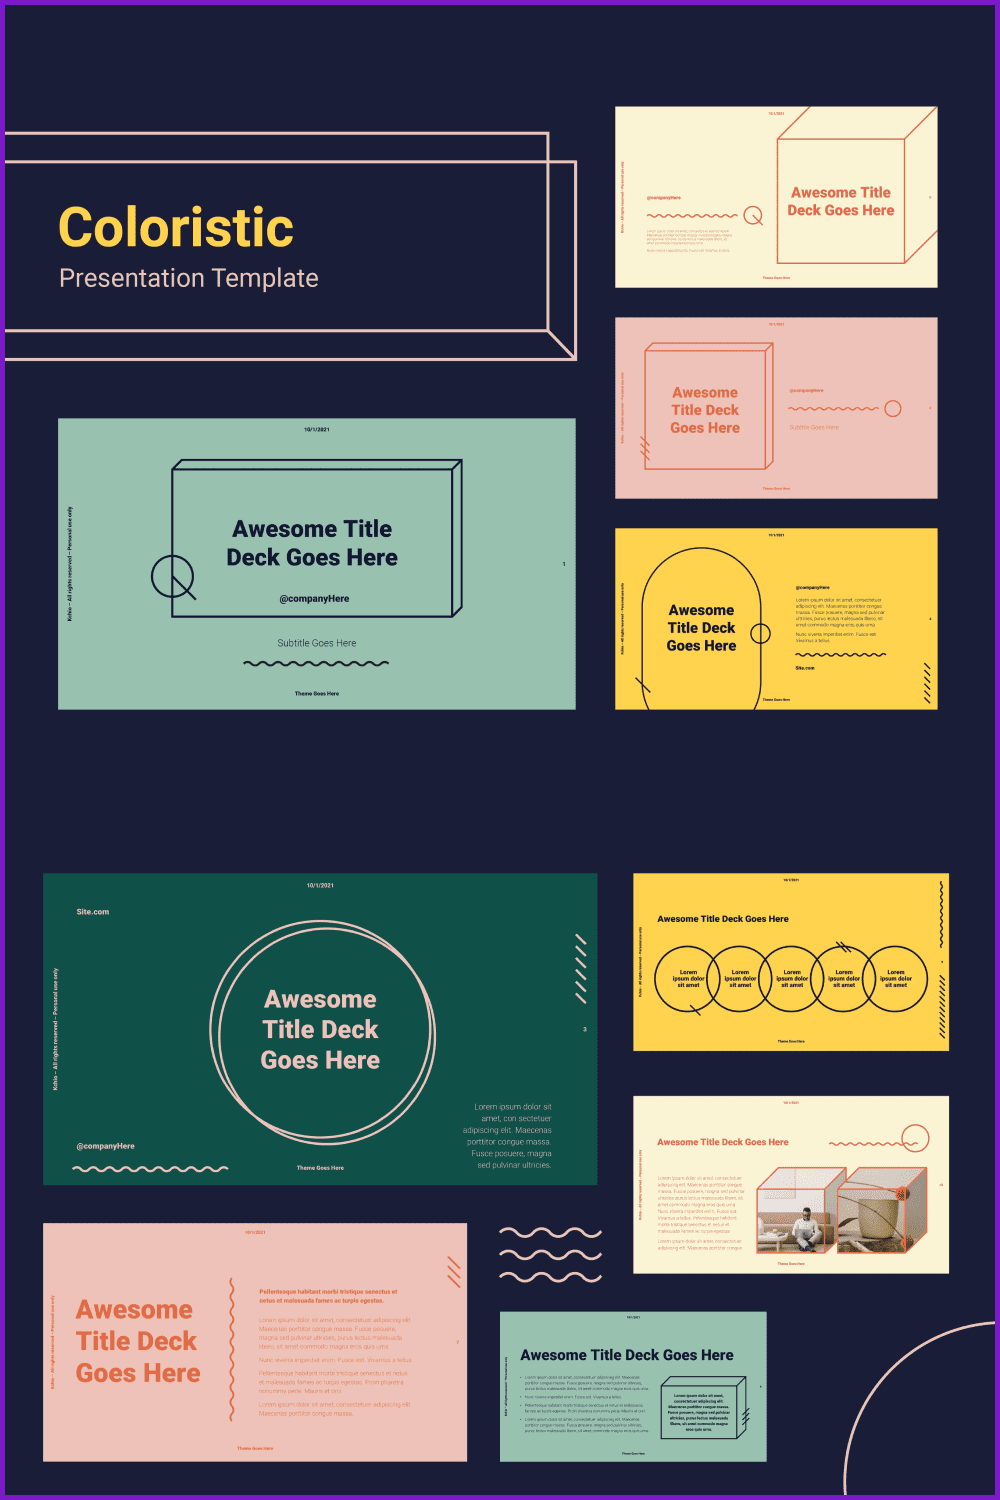 Colorful slides with images, text, charts and media.